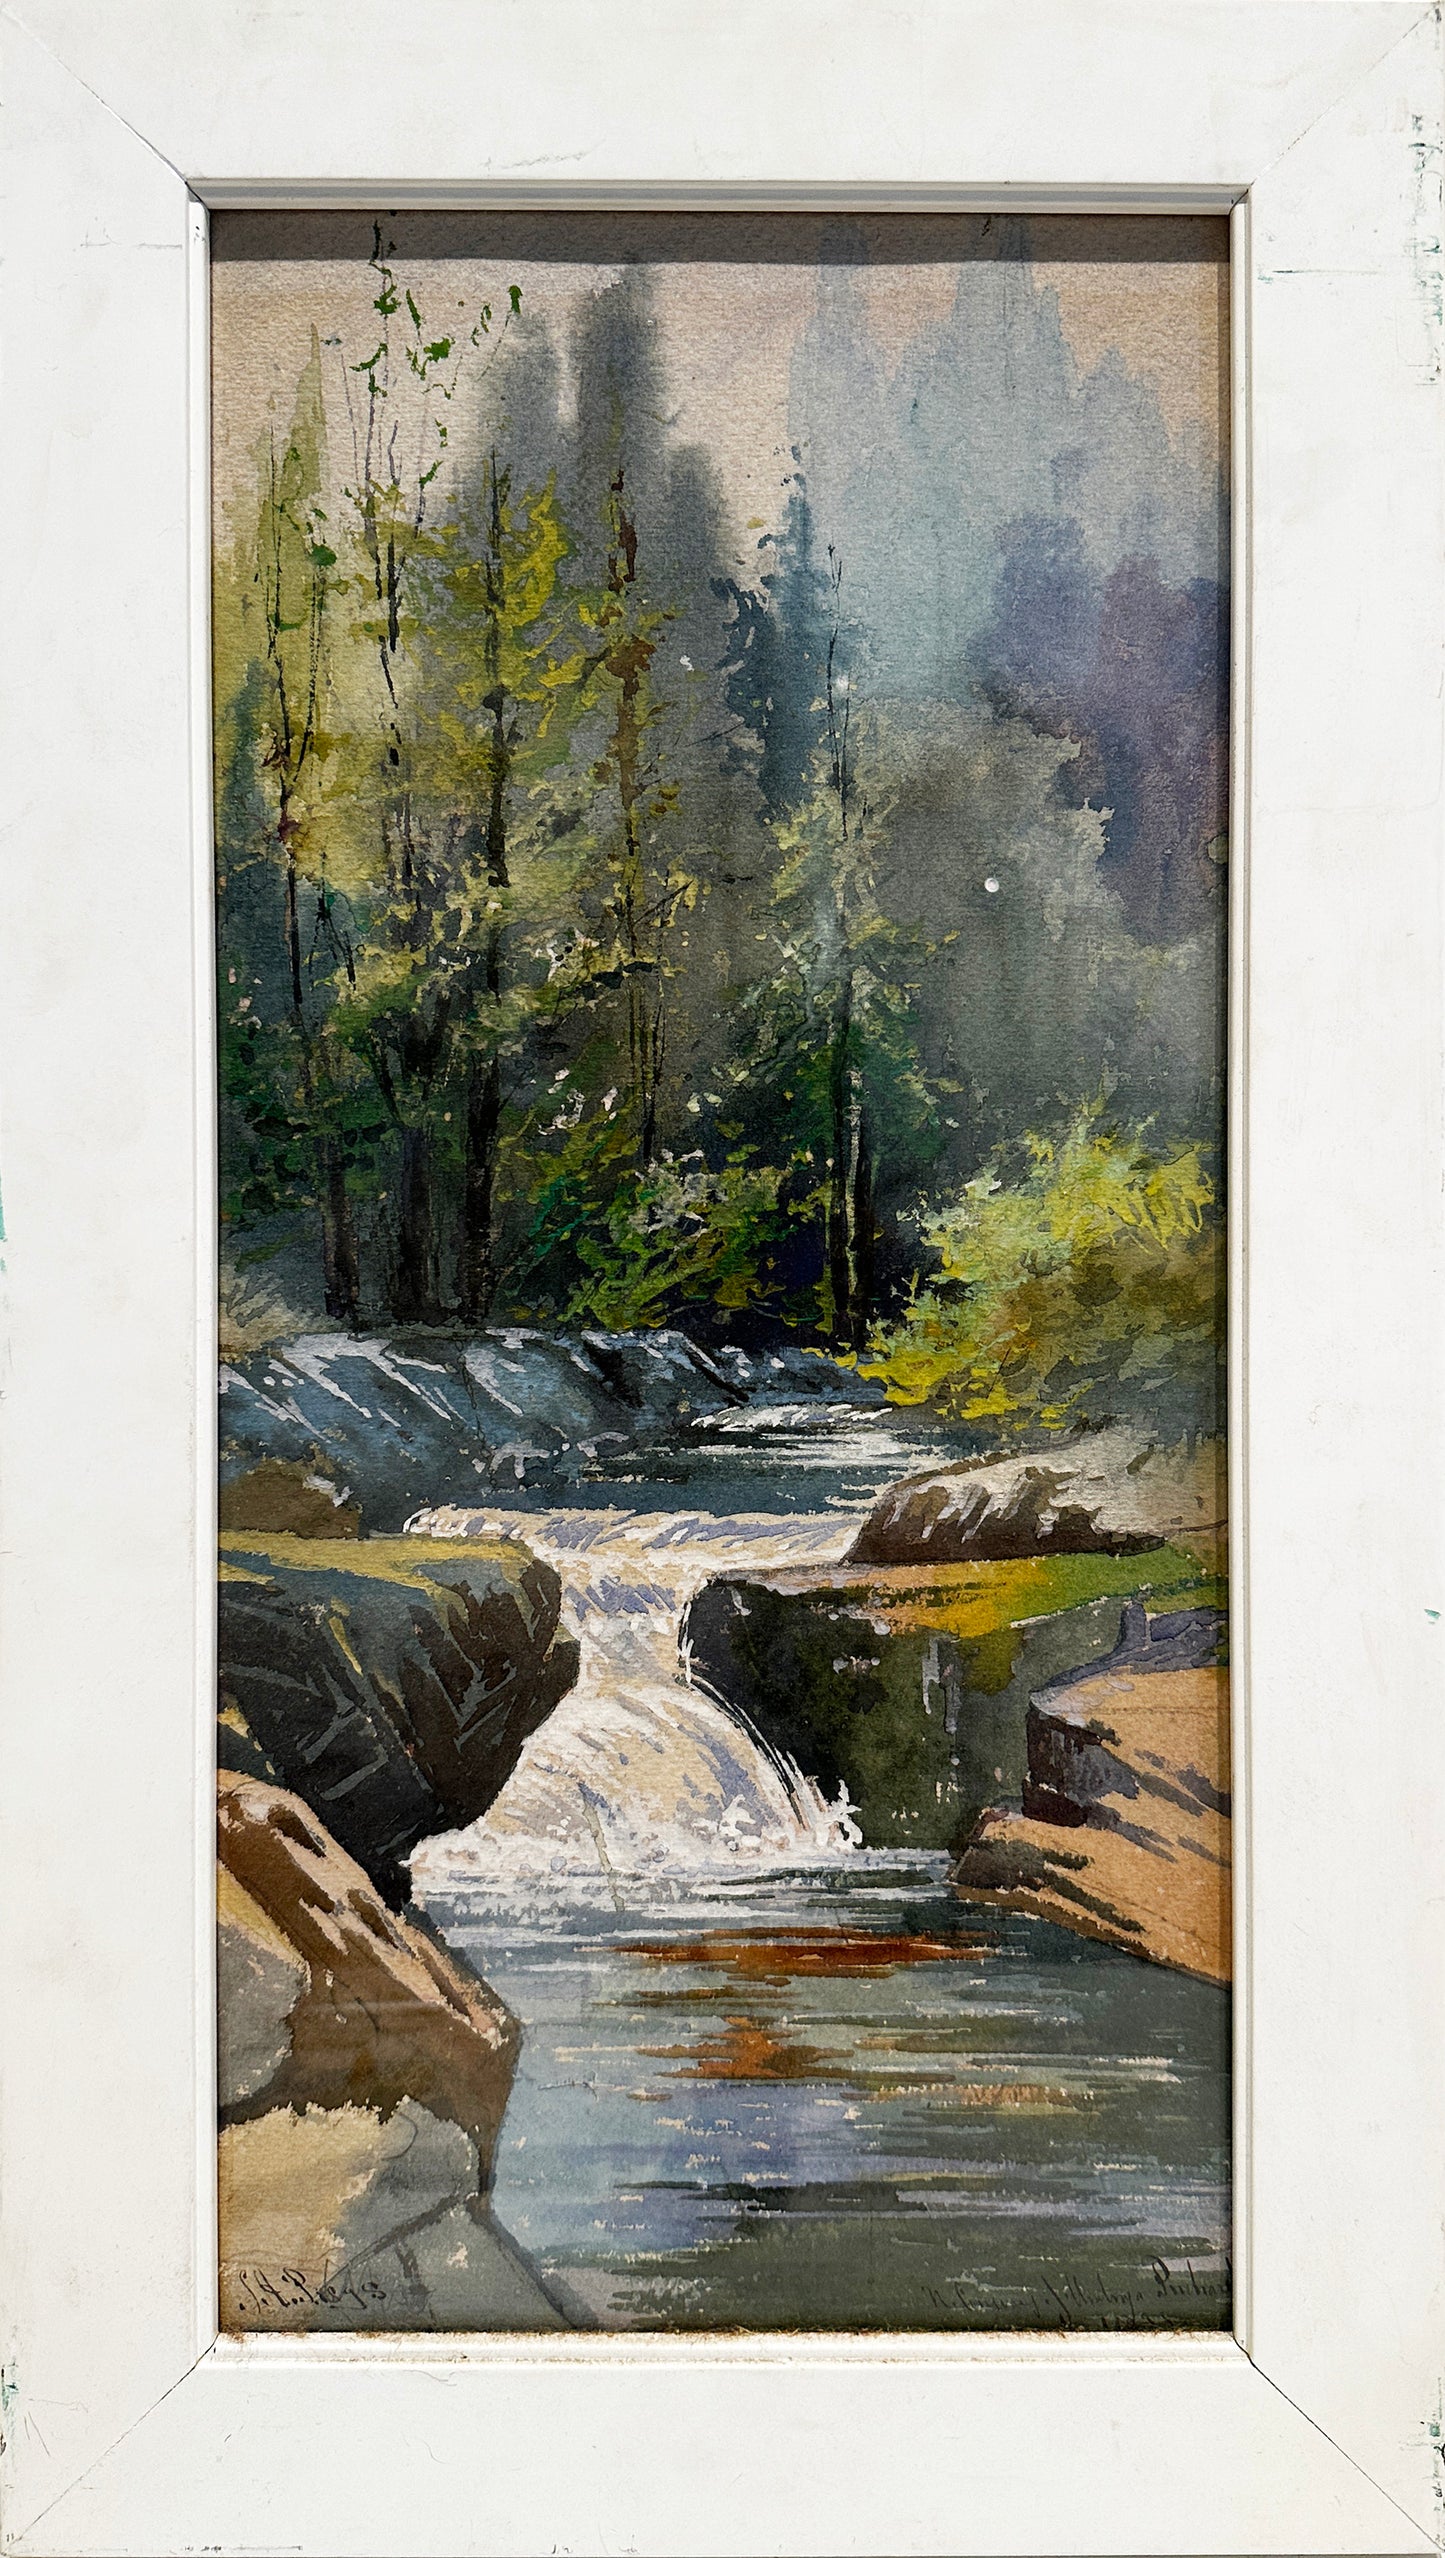 Justin Pregas Watercolor: River running through forest